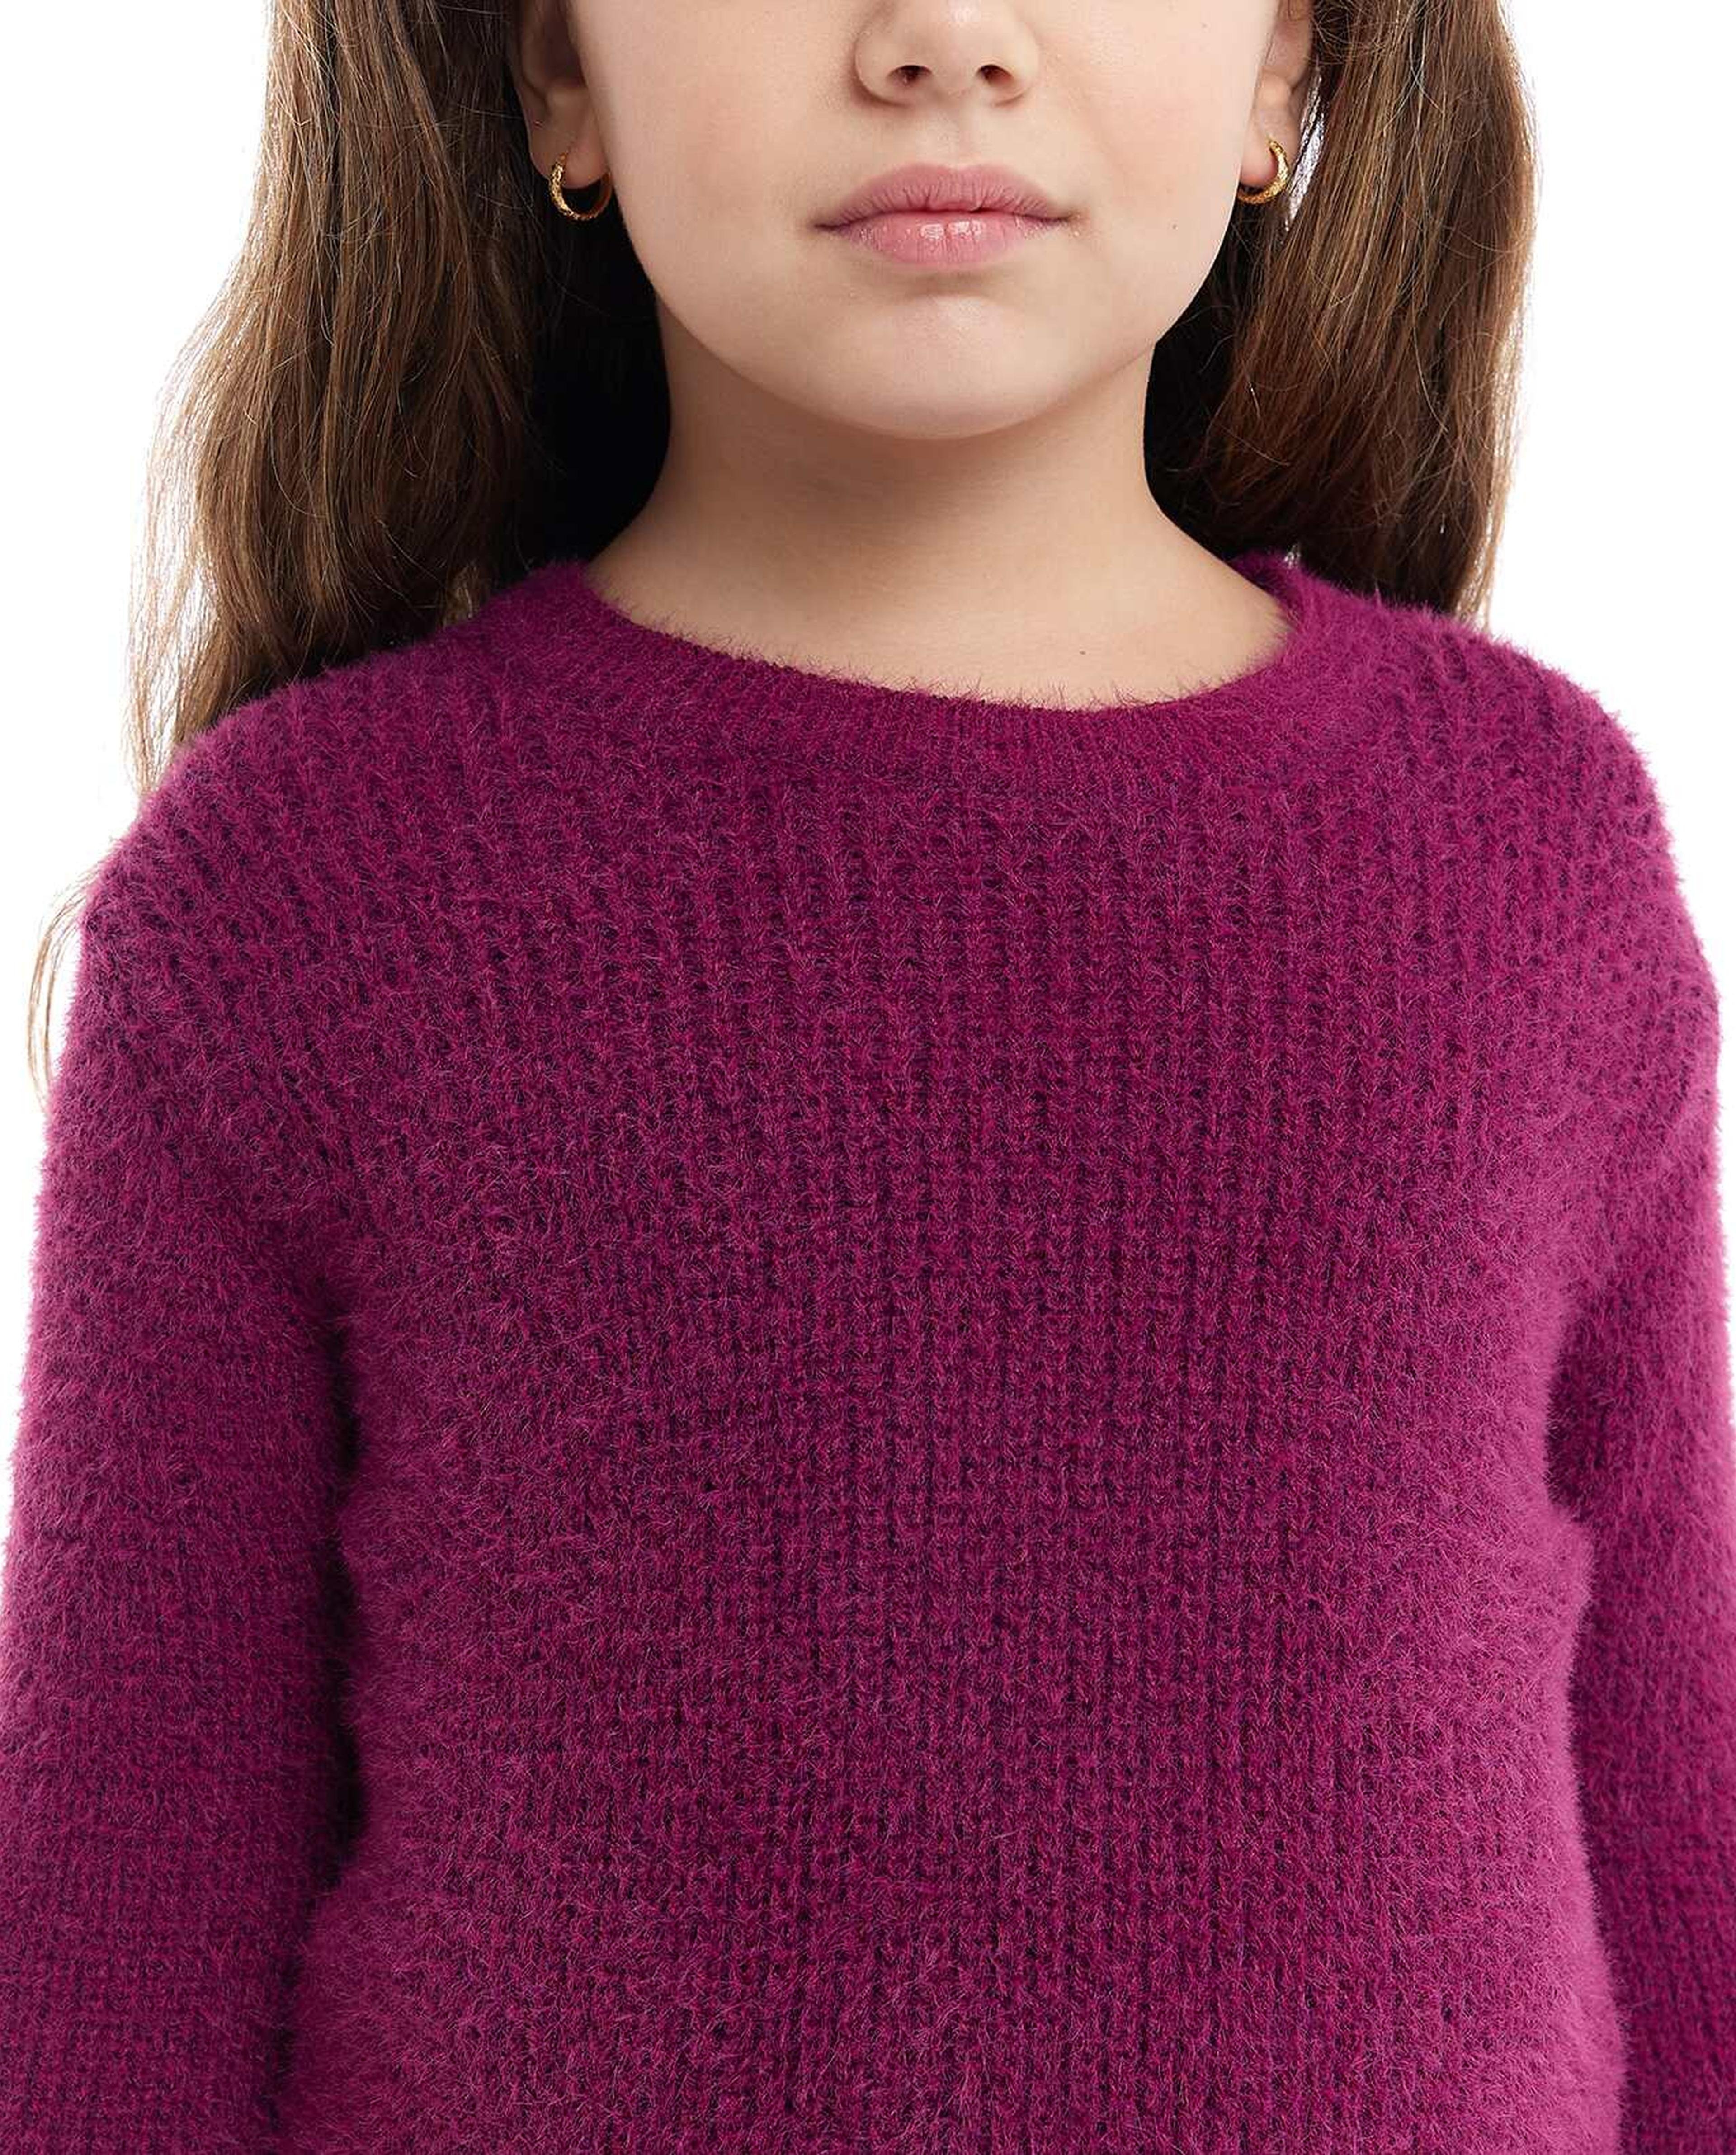 Knitted Sweater with Crew Neck and Long Sleeves